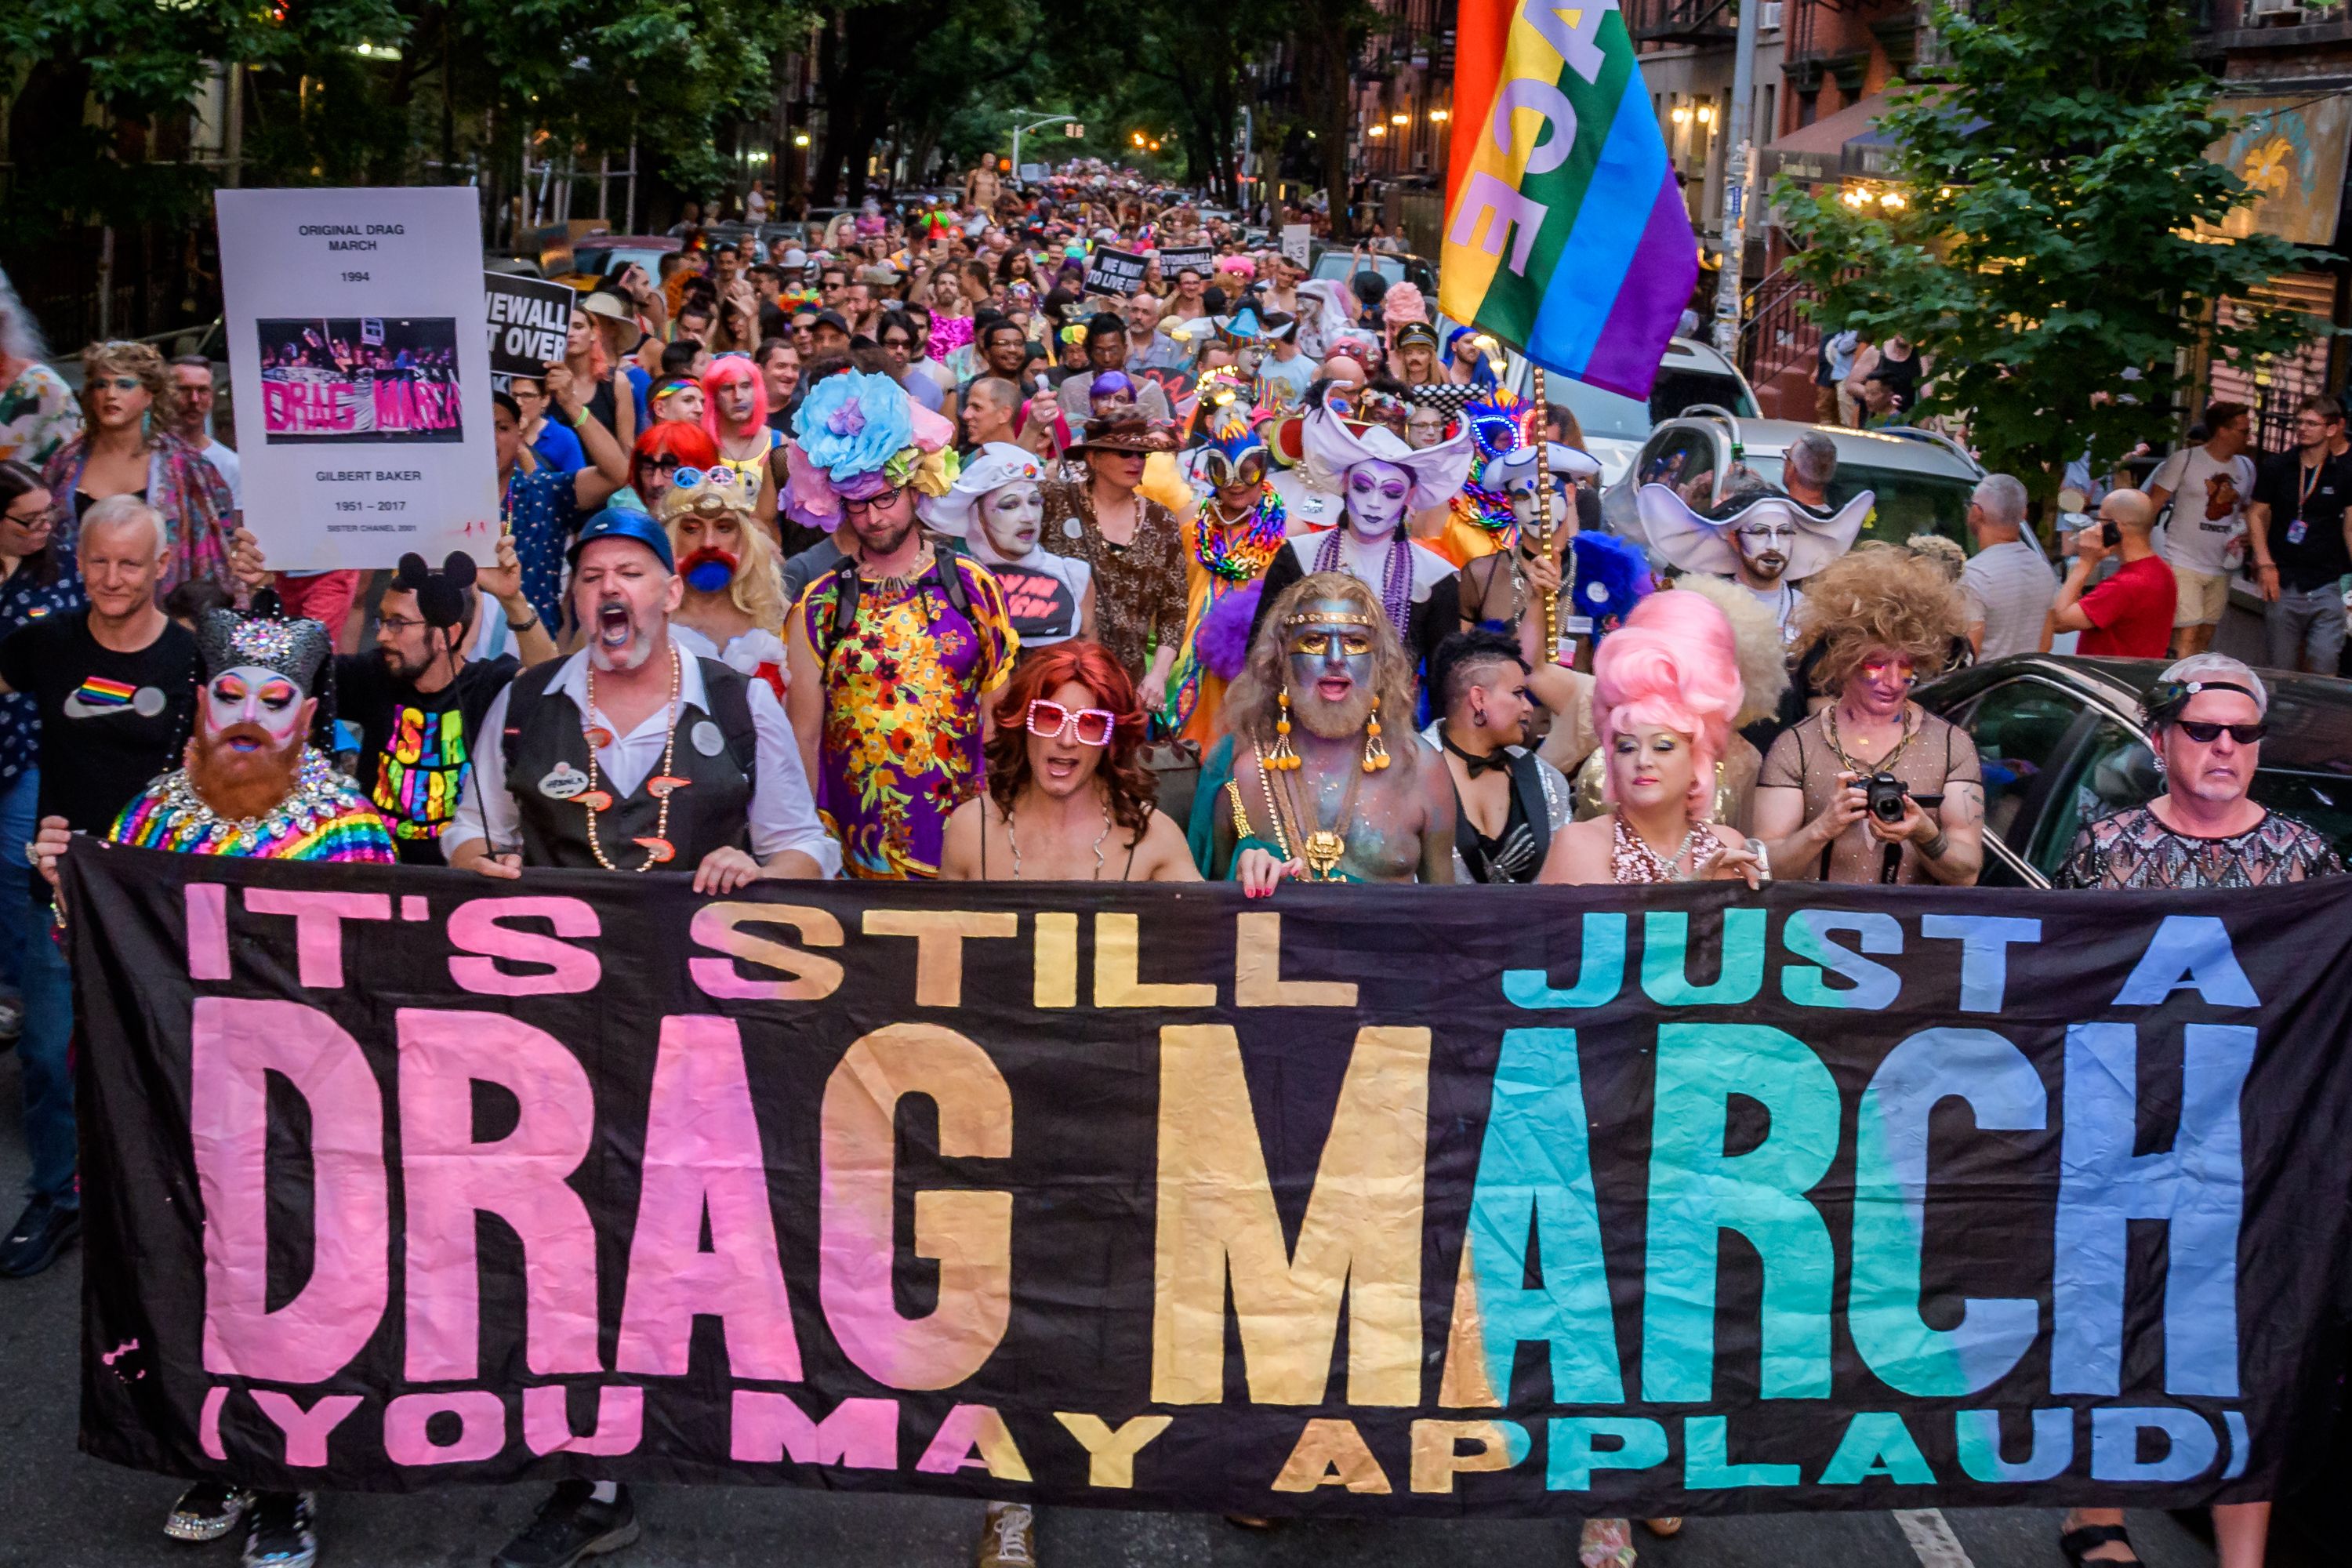  Hundreds Of Drag Queens filled the streets for the New York City Drag March.